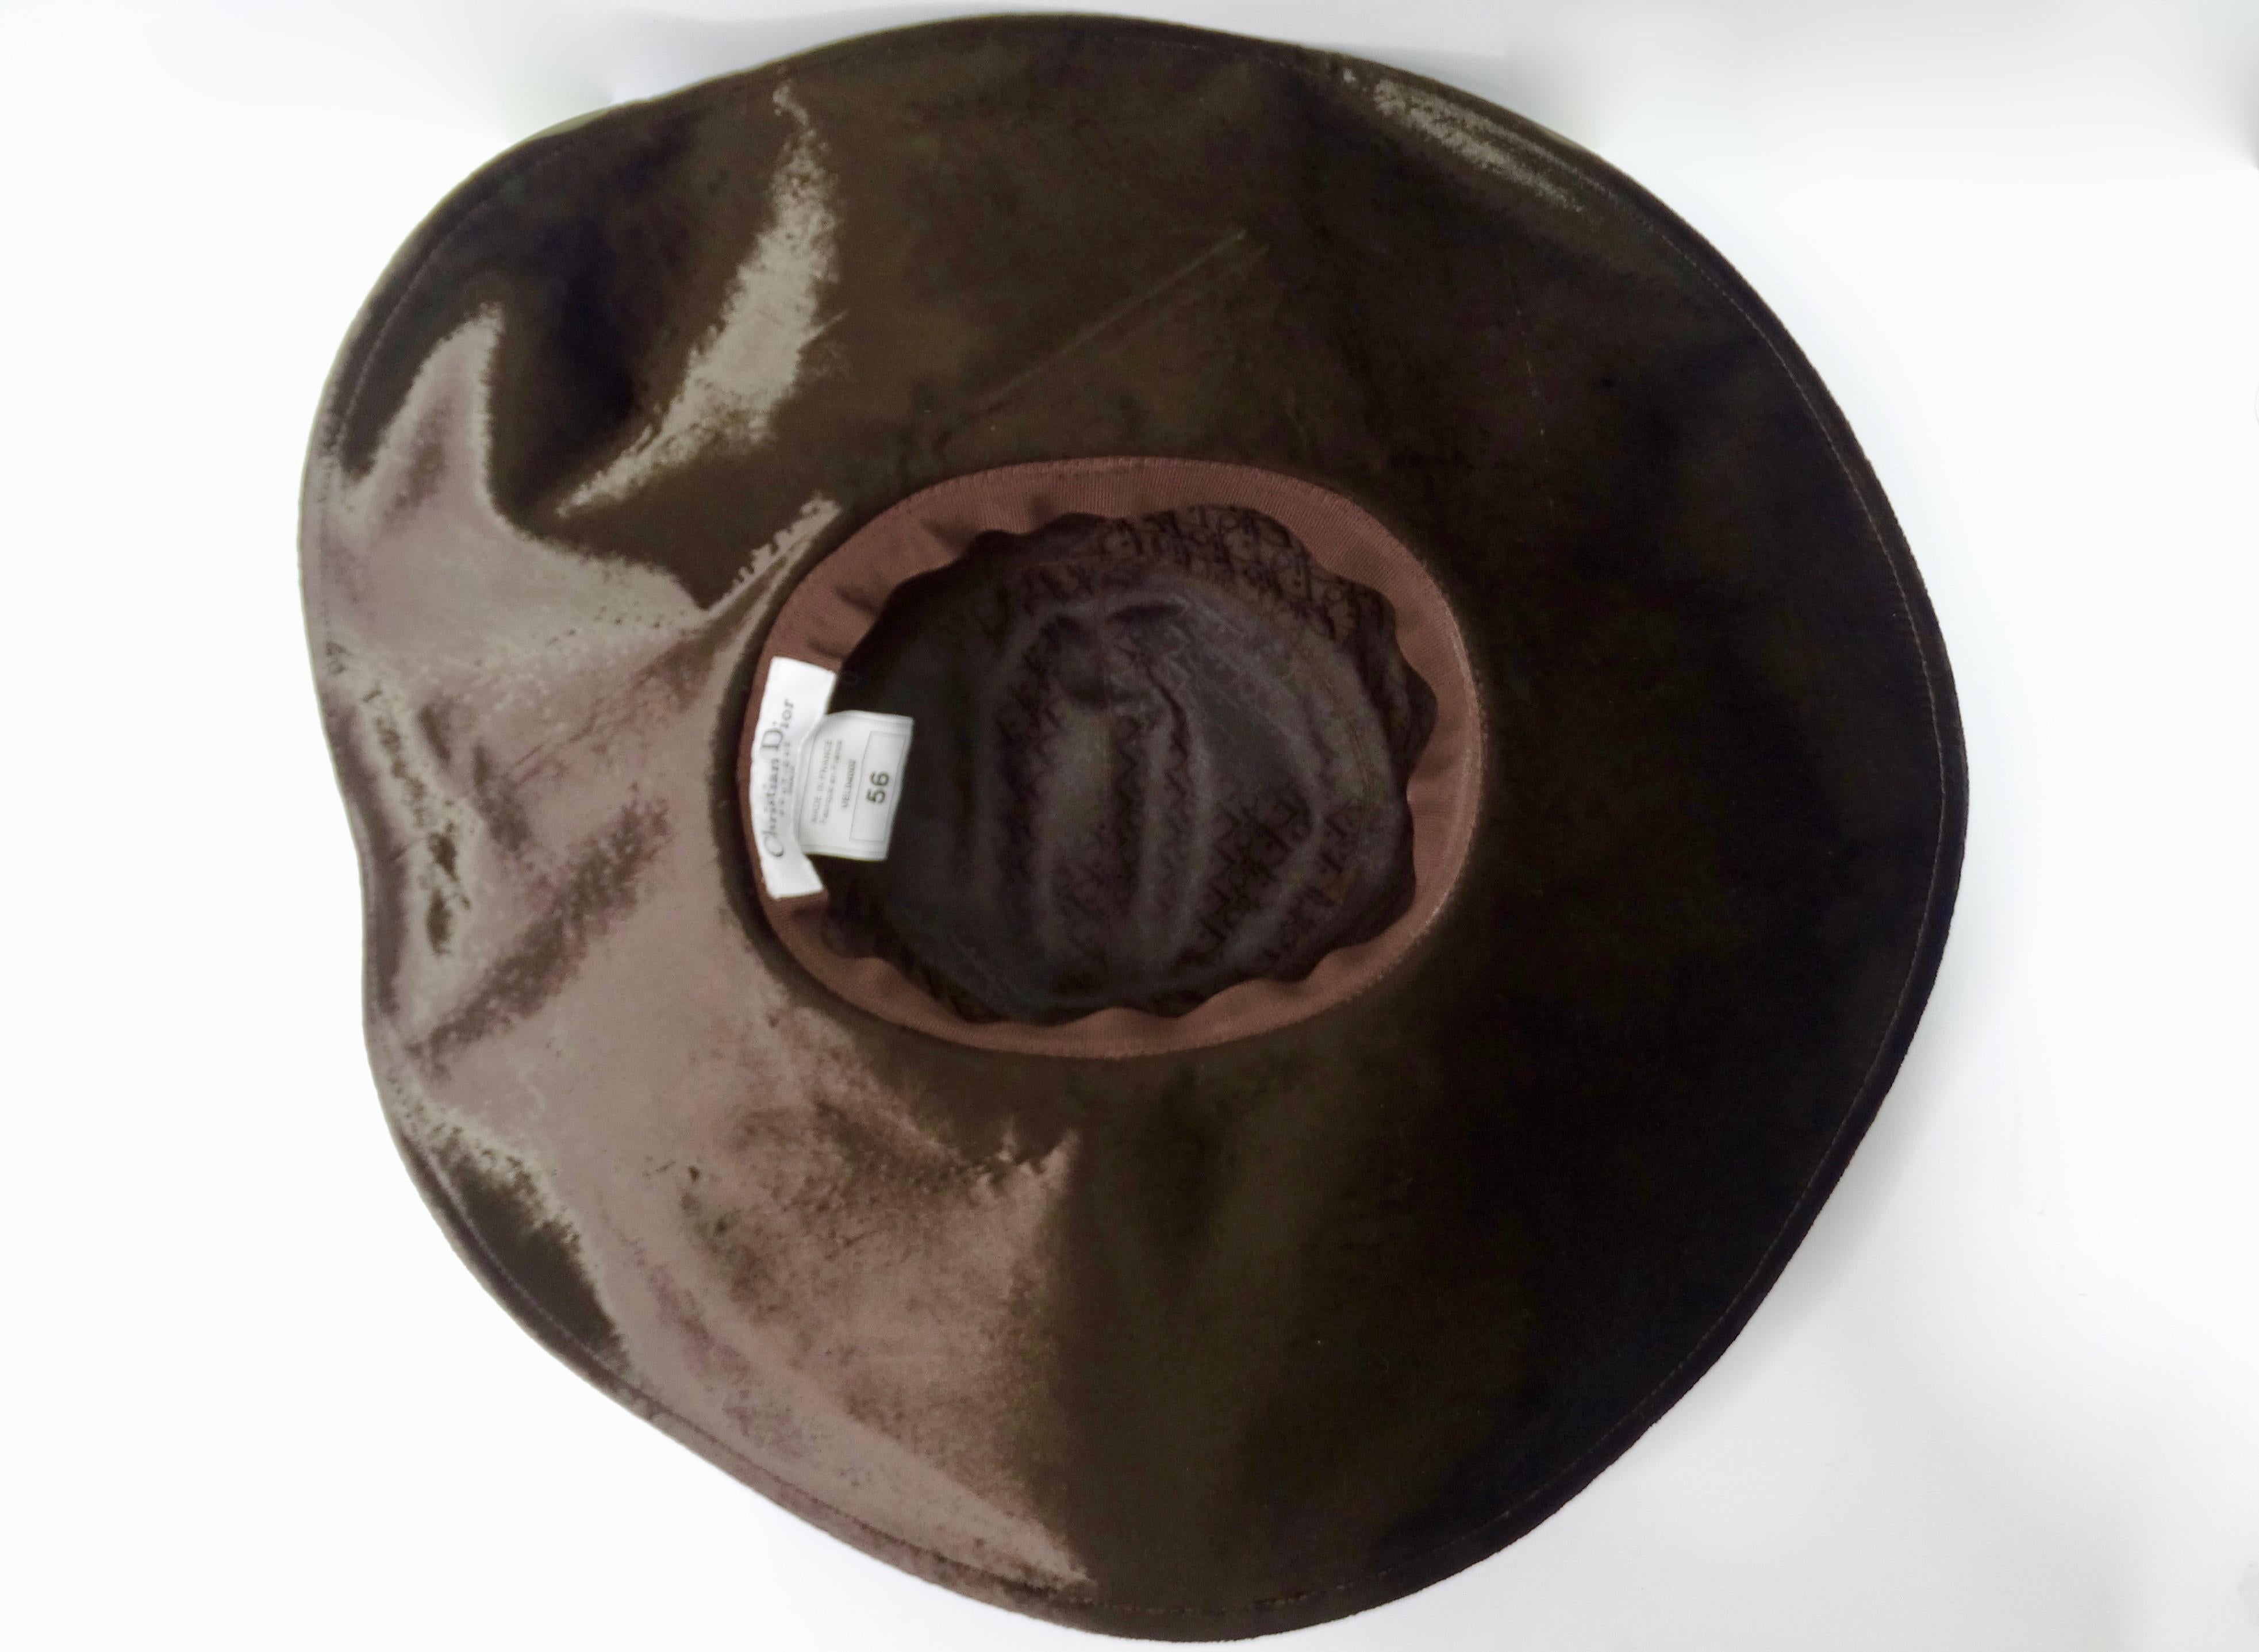 Too a-dior-able! Created in the 1990s with a 70s style (most likely from the Galliano era), this Dior sun hat is crafted from chocolate brown viscose velvet and features a wide floppy brim with a wire trim for a structured look. Interior is lined